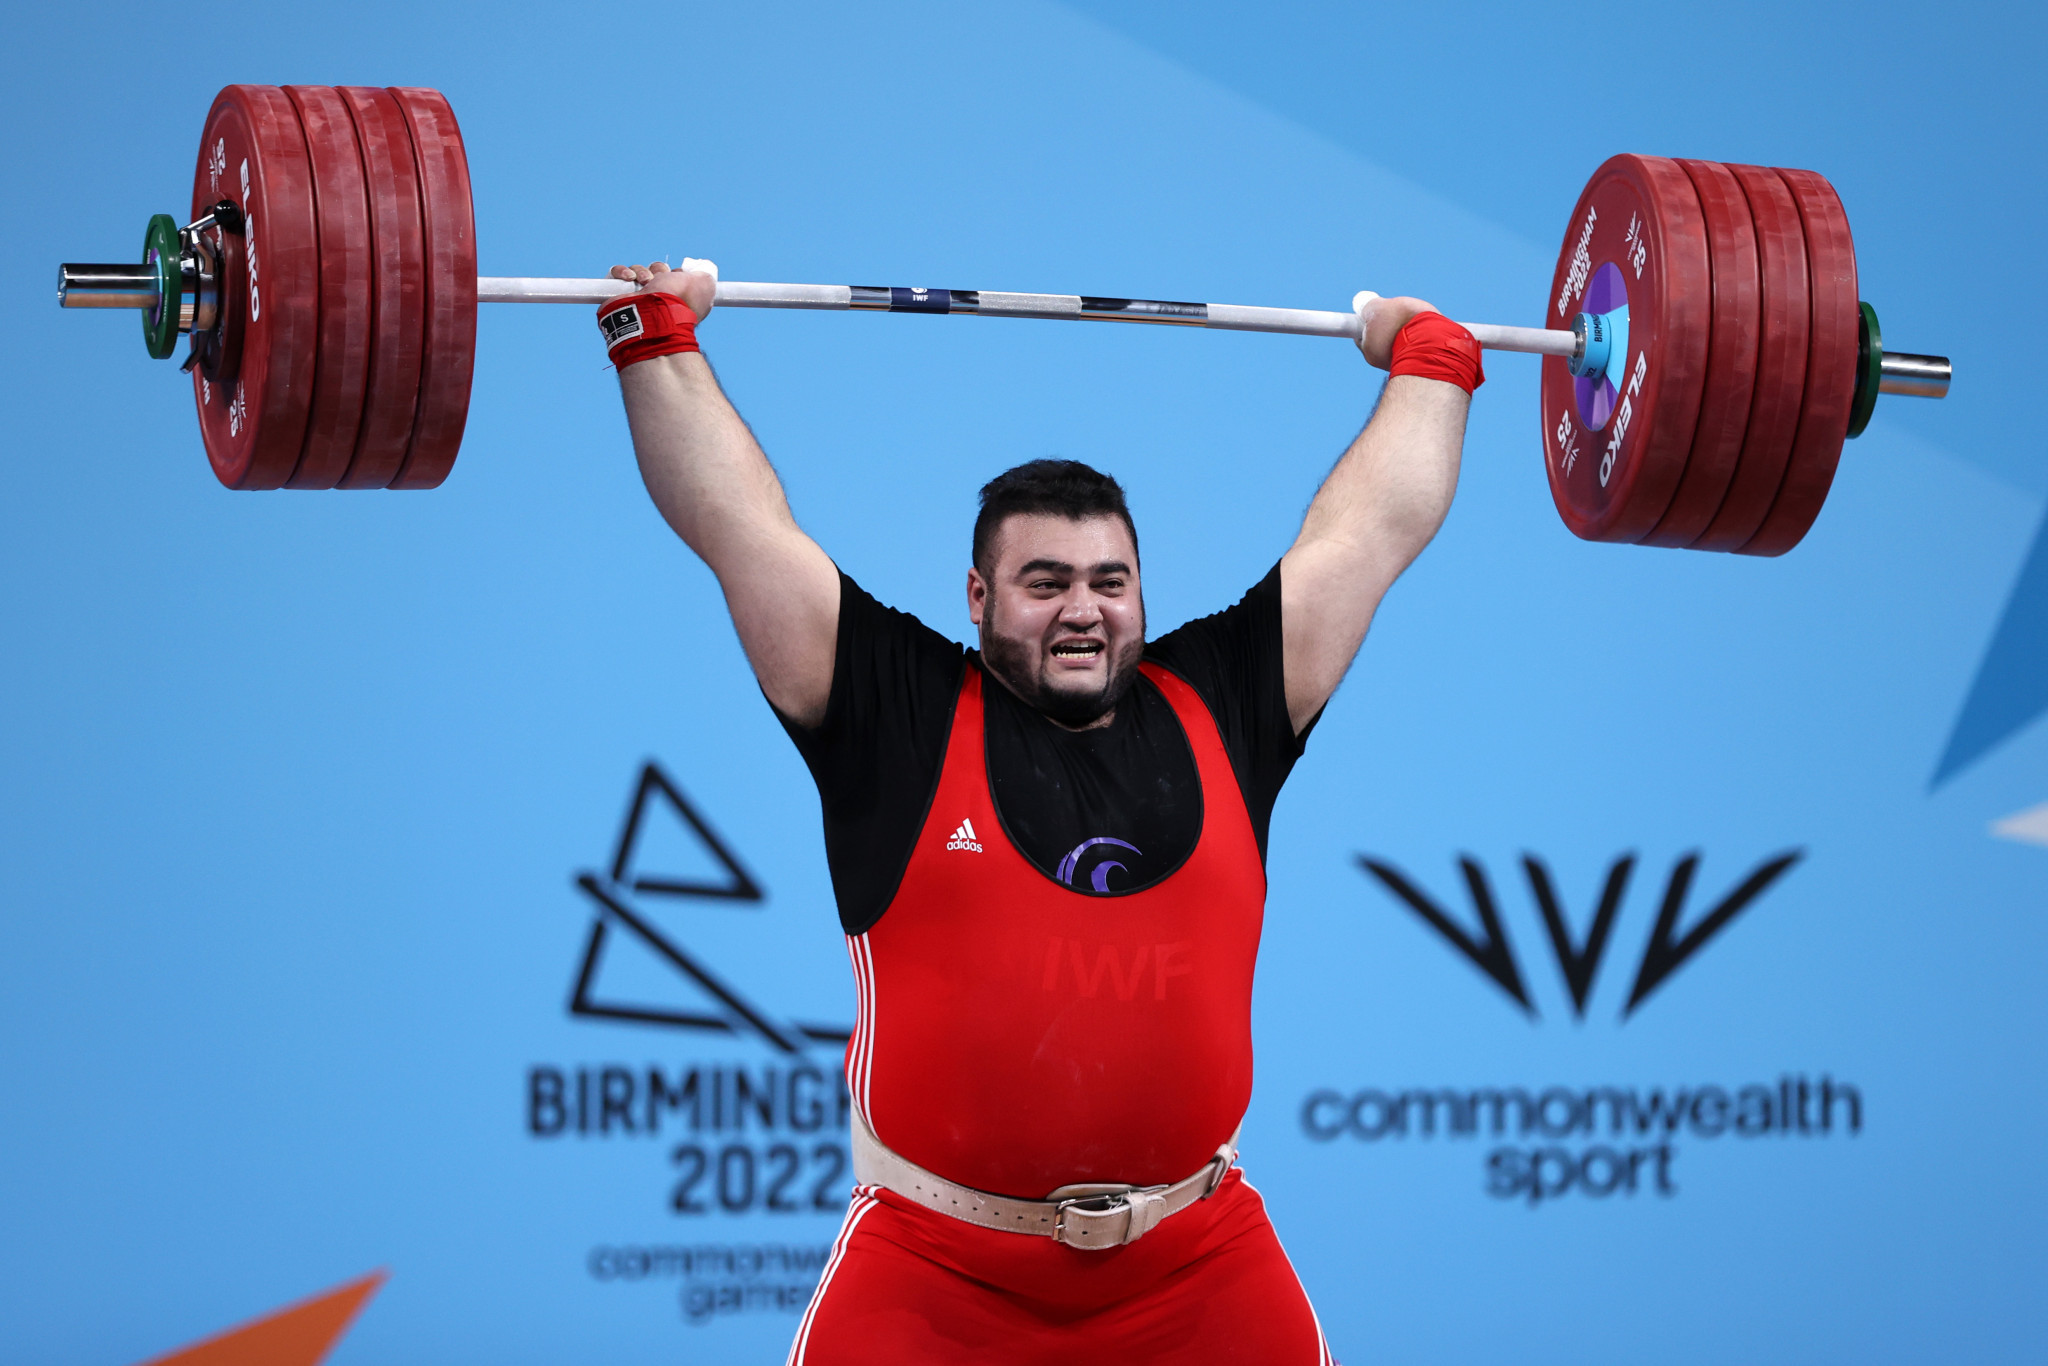 Rift in Pakistan leaves IOC-backed weightlifter's Paris 2024 participation in doubt